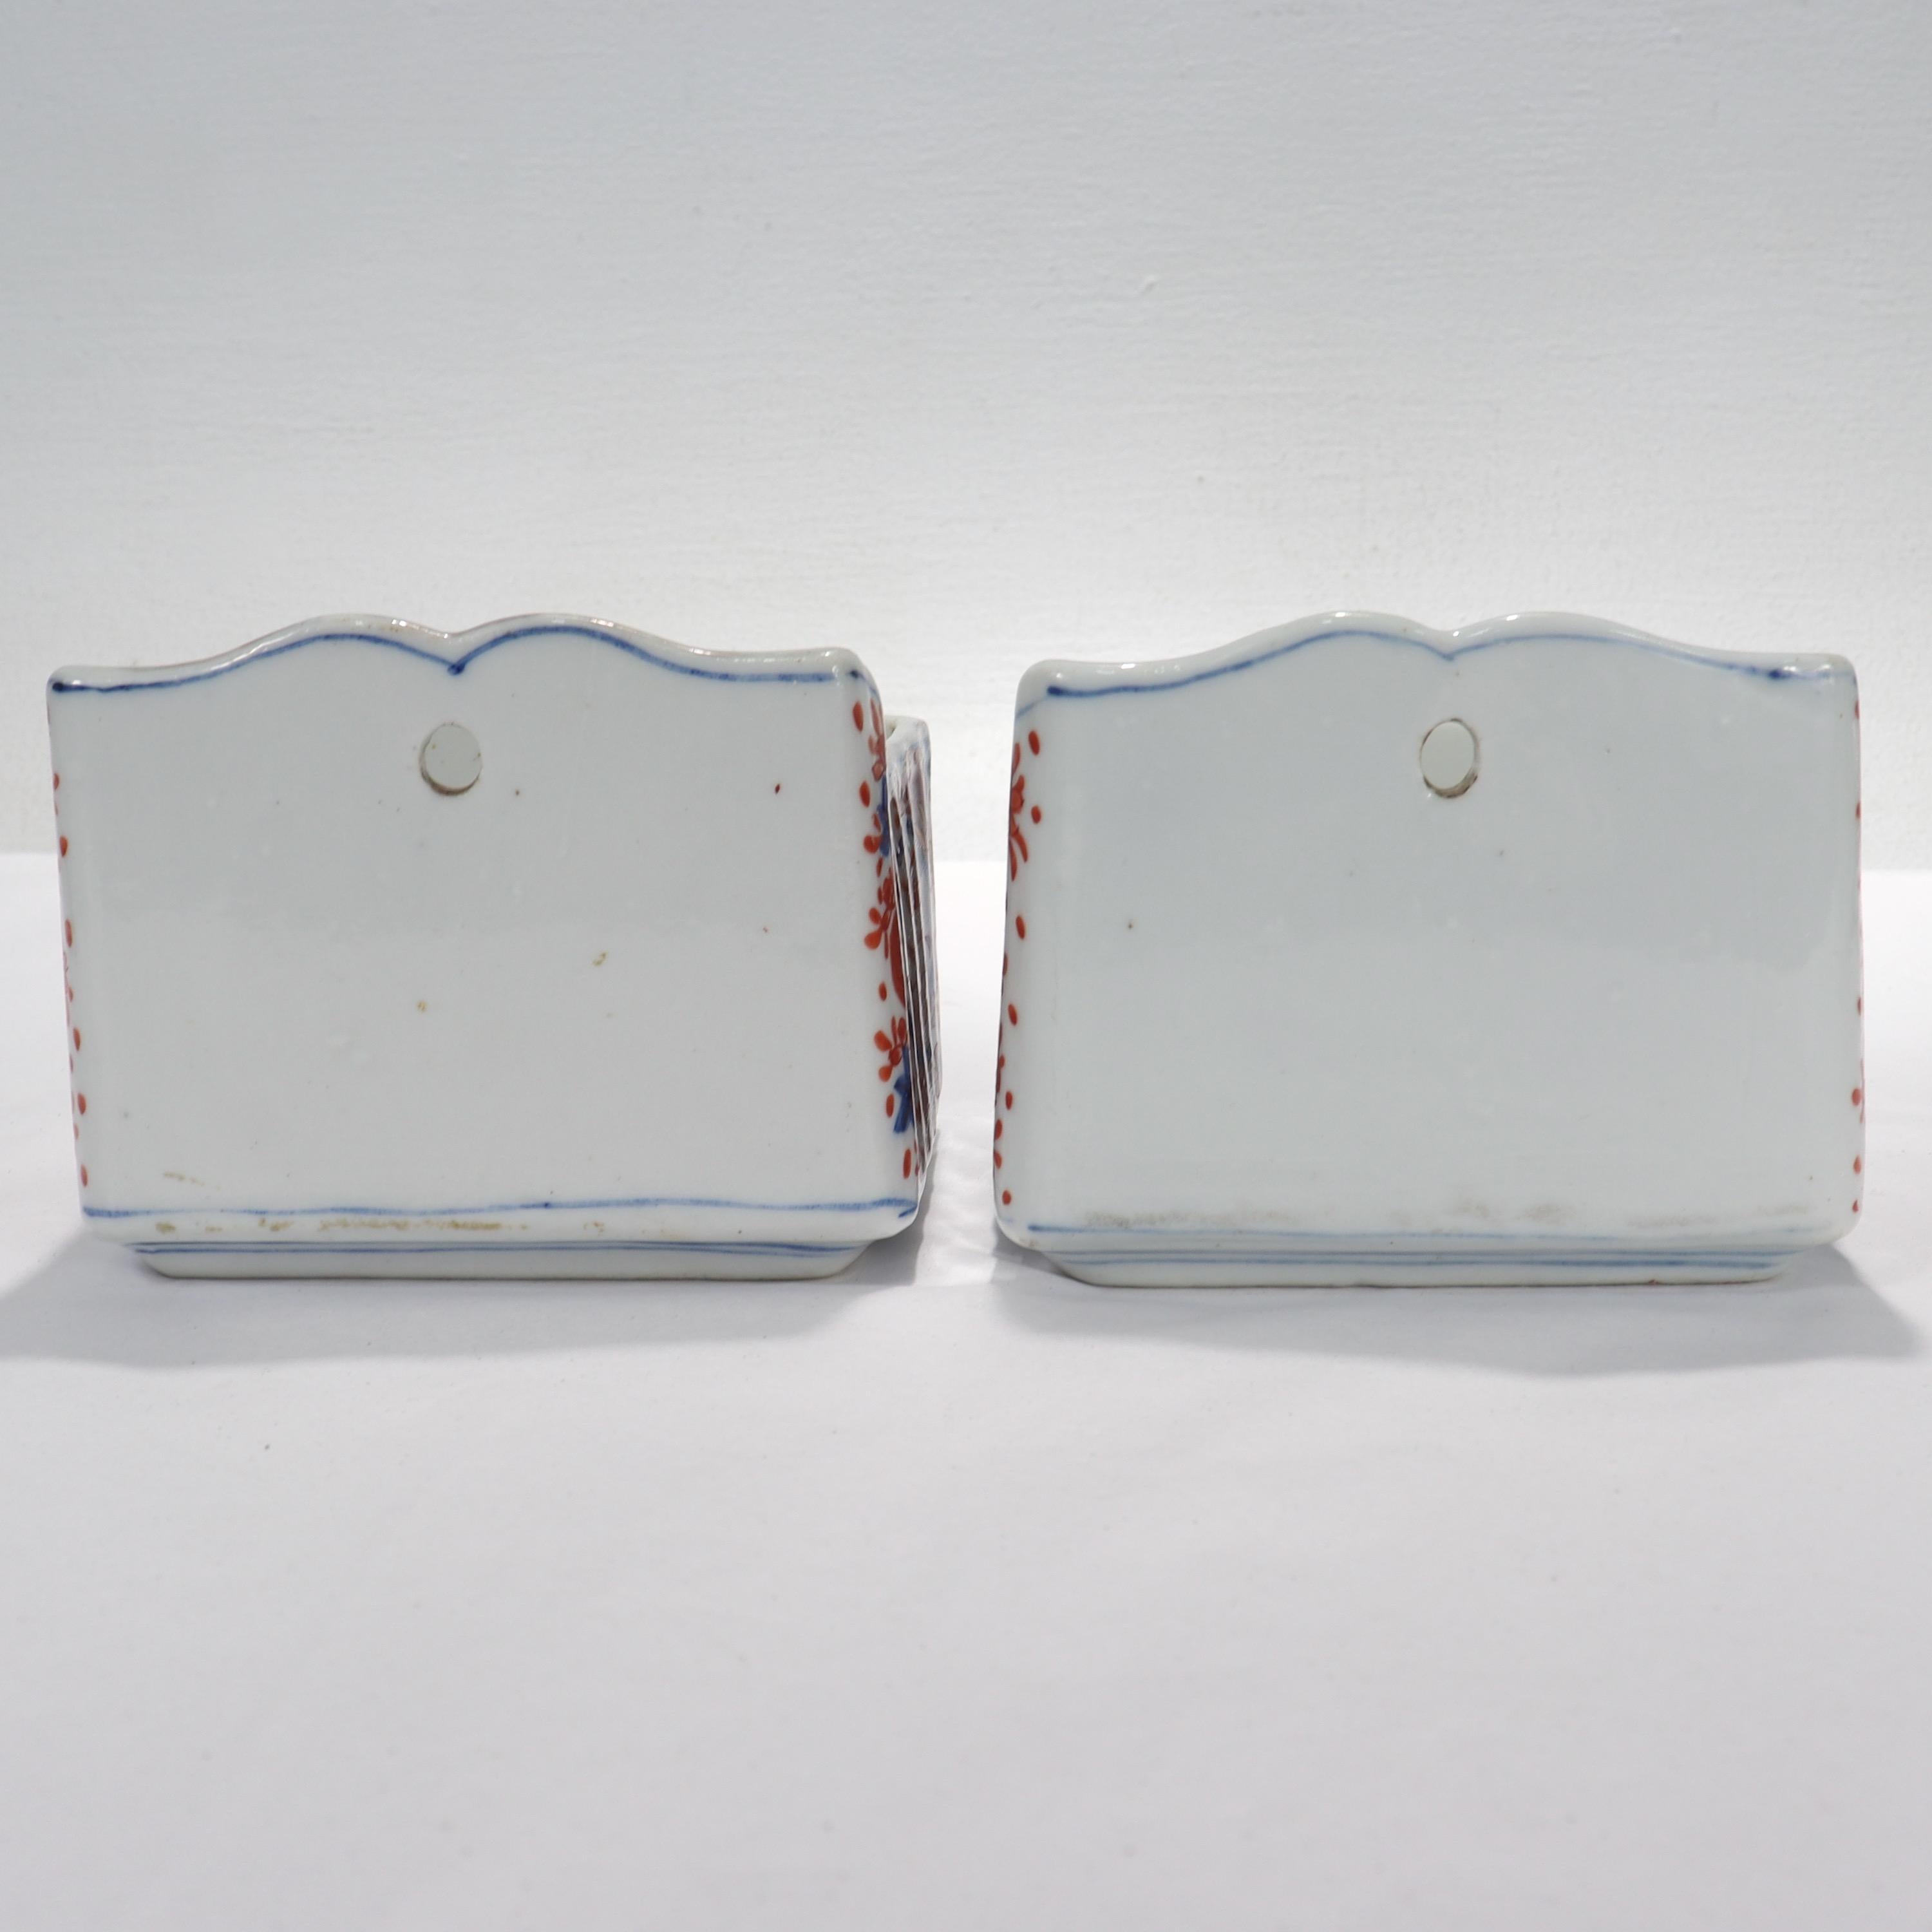 Pair of Old or Antique Japanese Imari Porcelain Soap Dishes For Sale 1